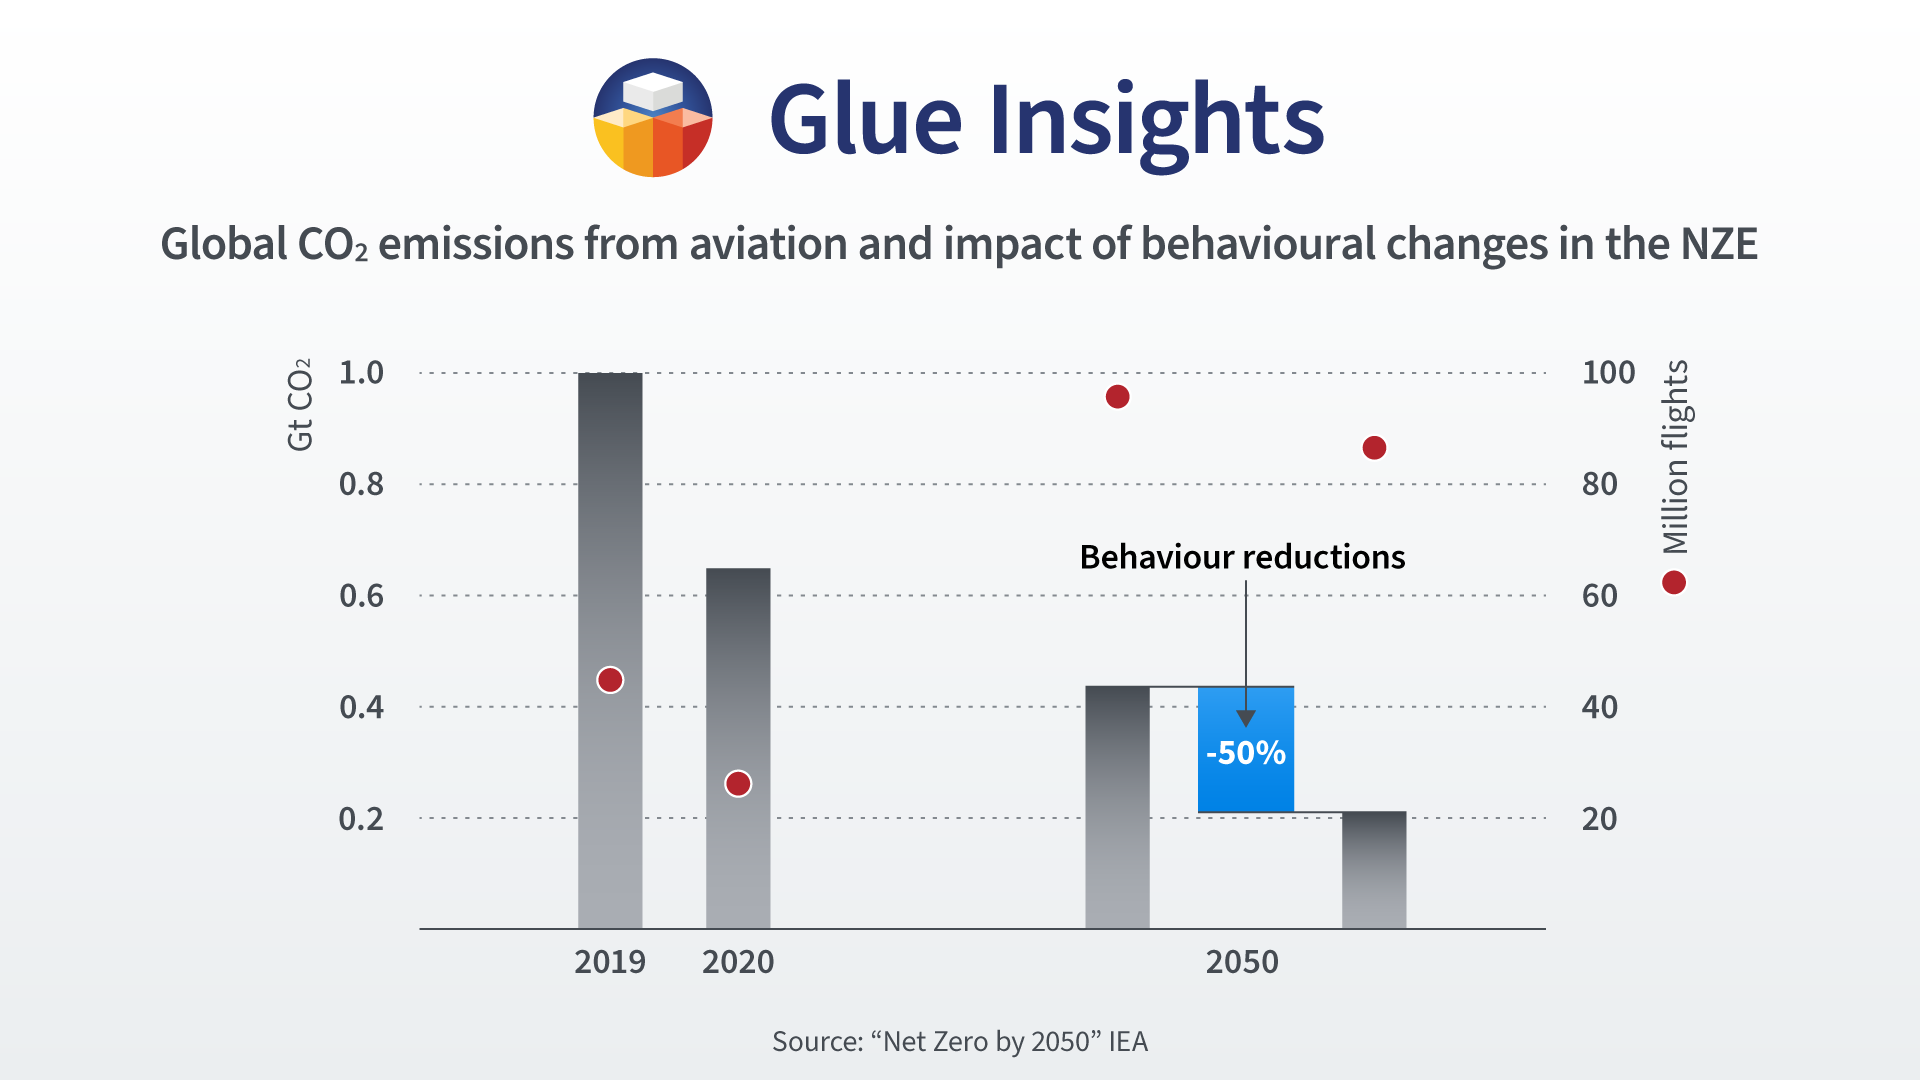 Global CO2 emissions from aviation and impact of behavioural changes